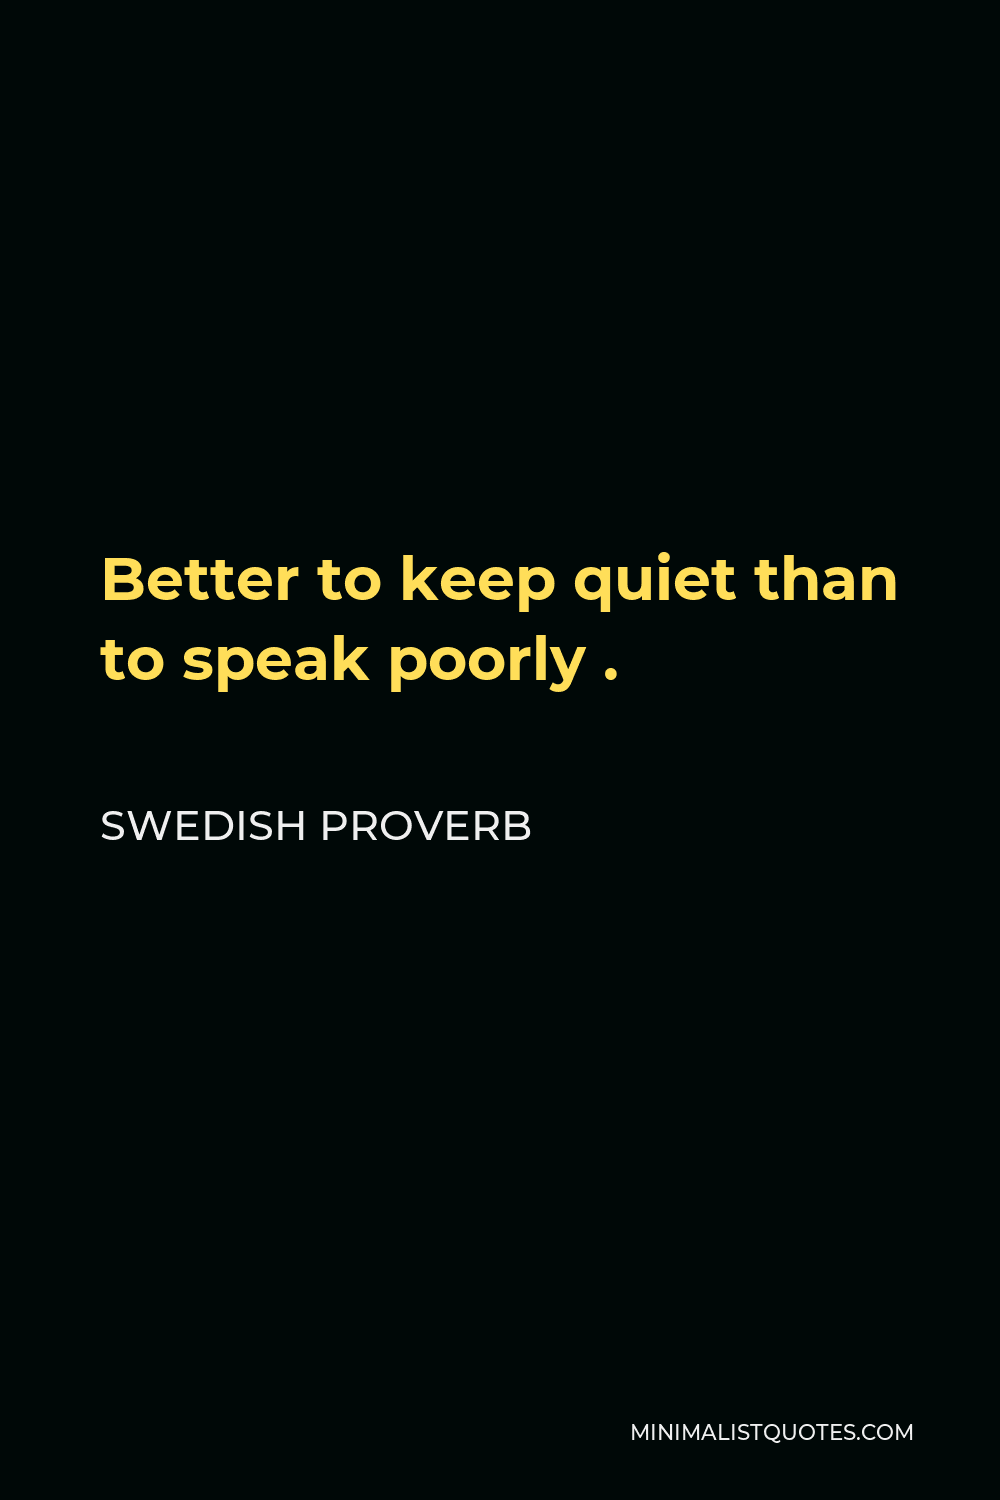 Swedish Proverb Quote - Better to keep quiet than to speak poorly .